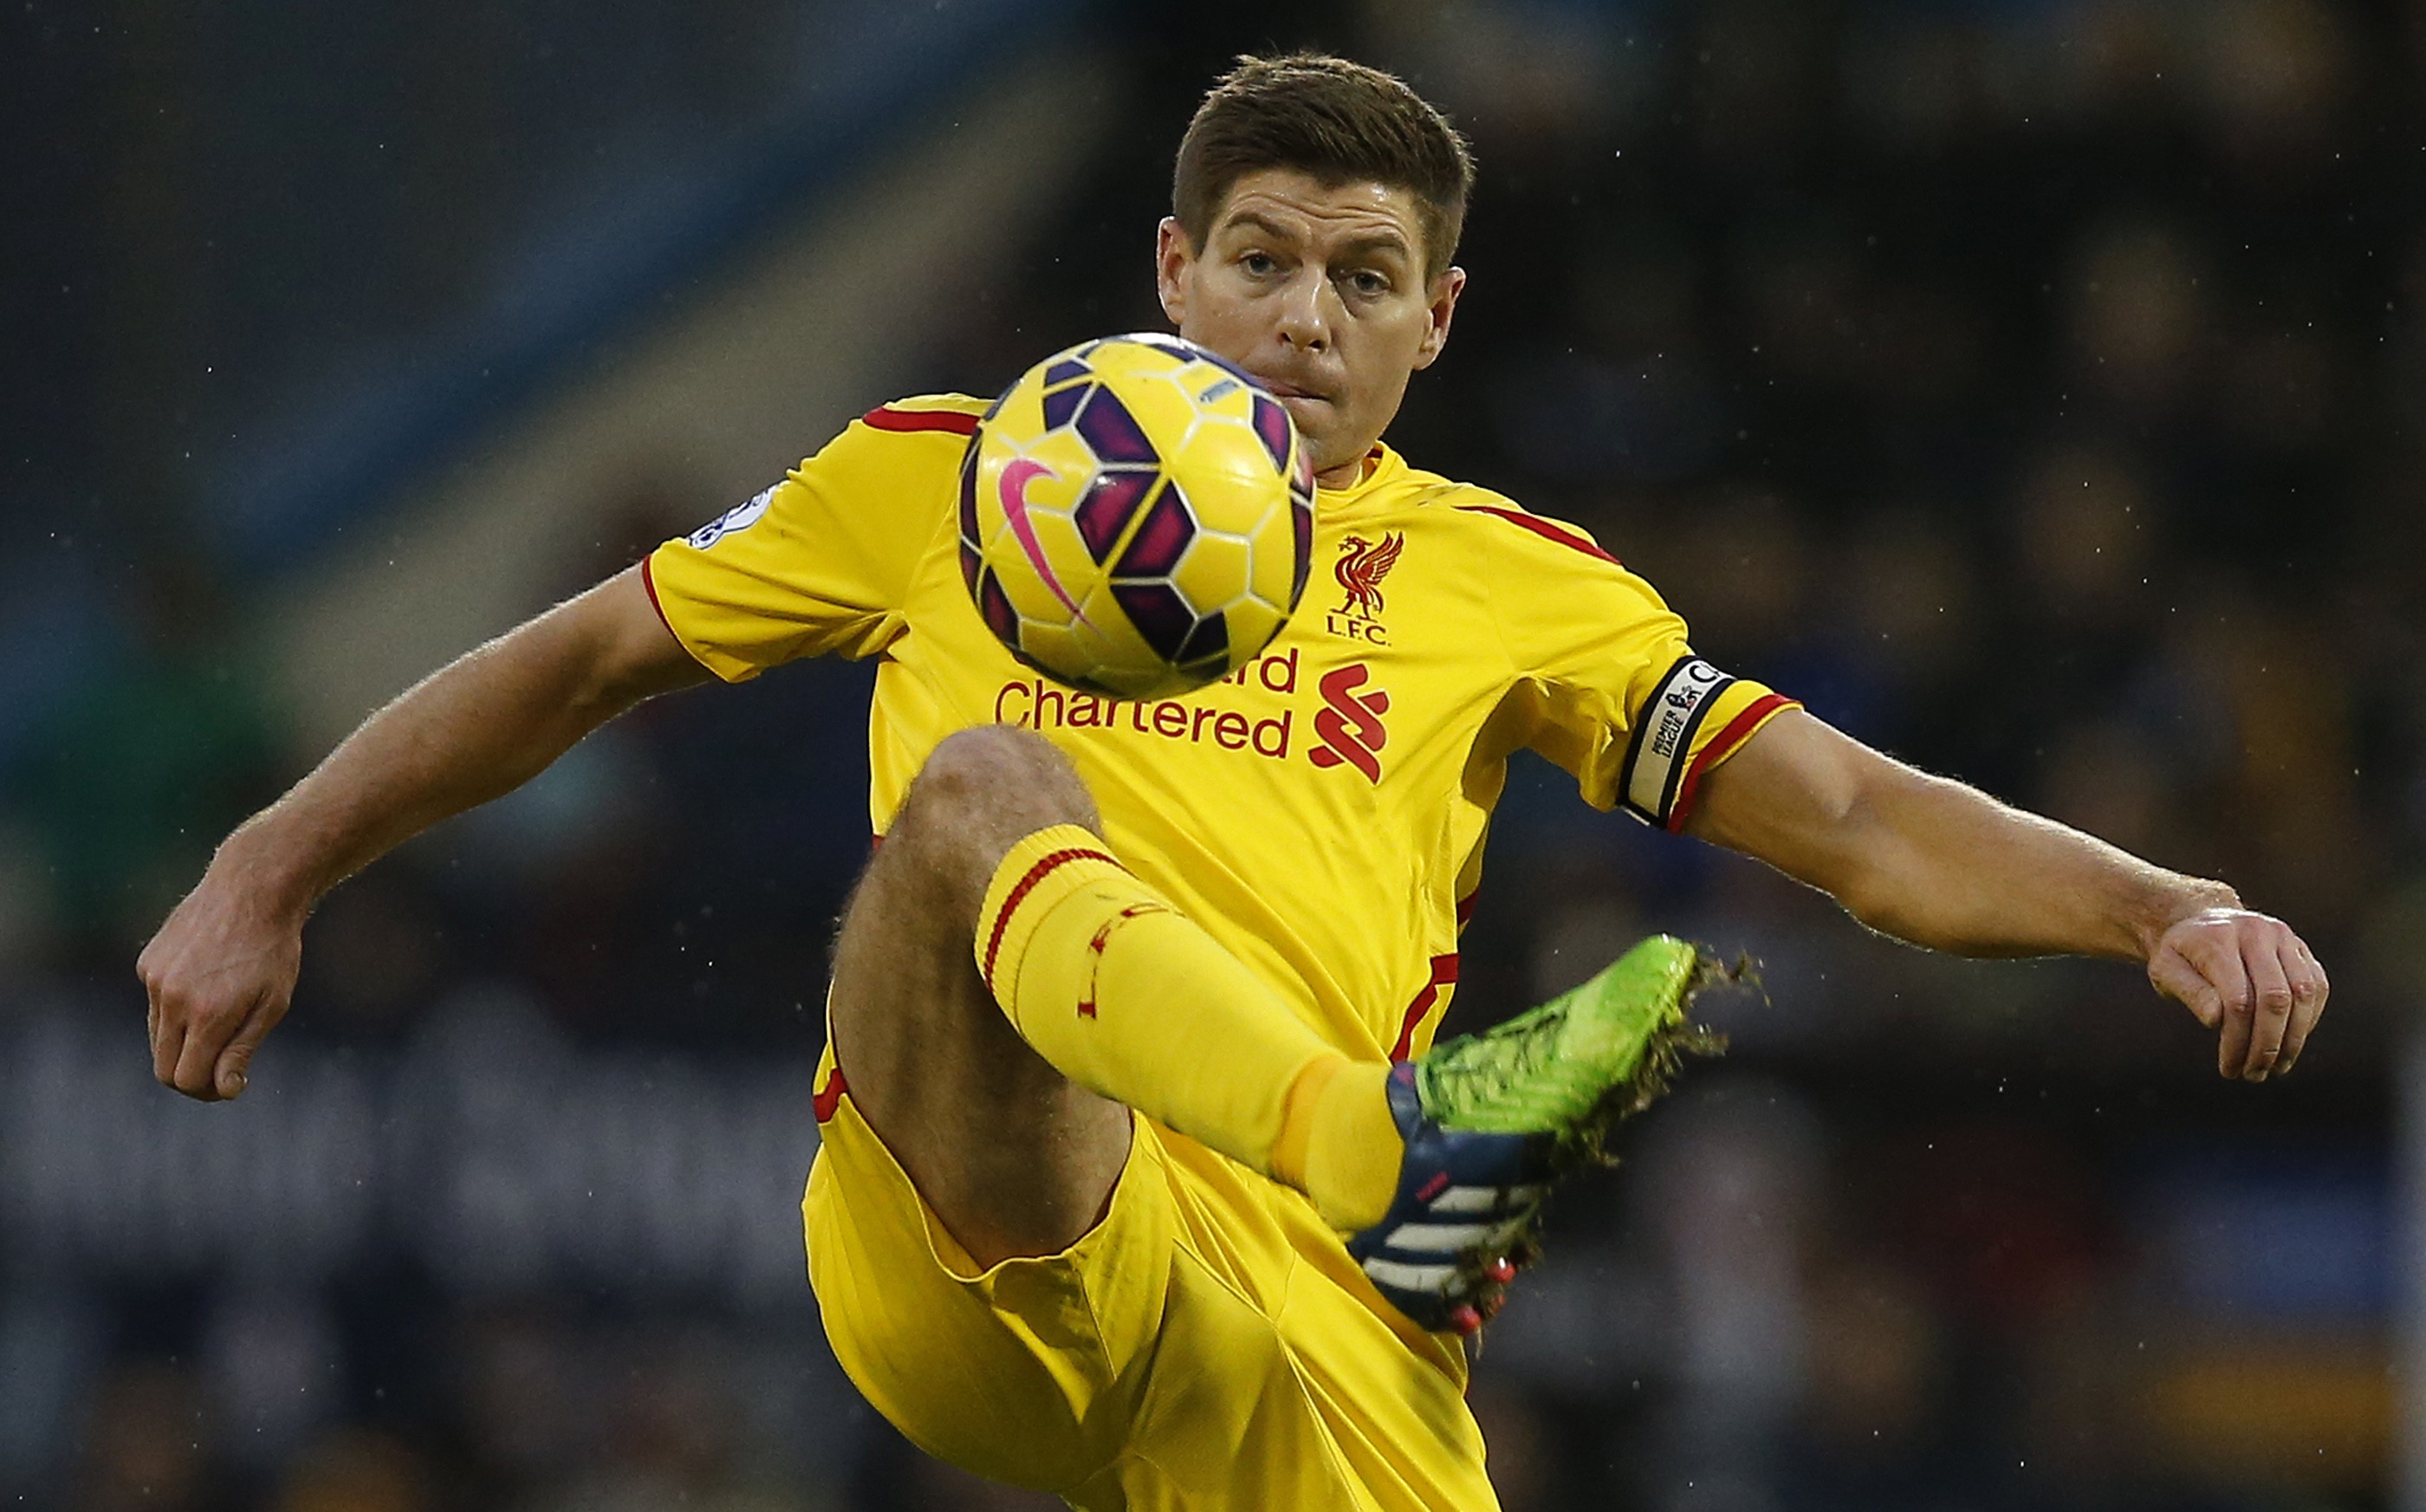 Liverpool's Steven Gerrard controls the ball during their English Premier League soccer match against Burnley at Turf Moor in Burnley